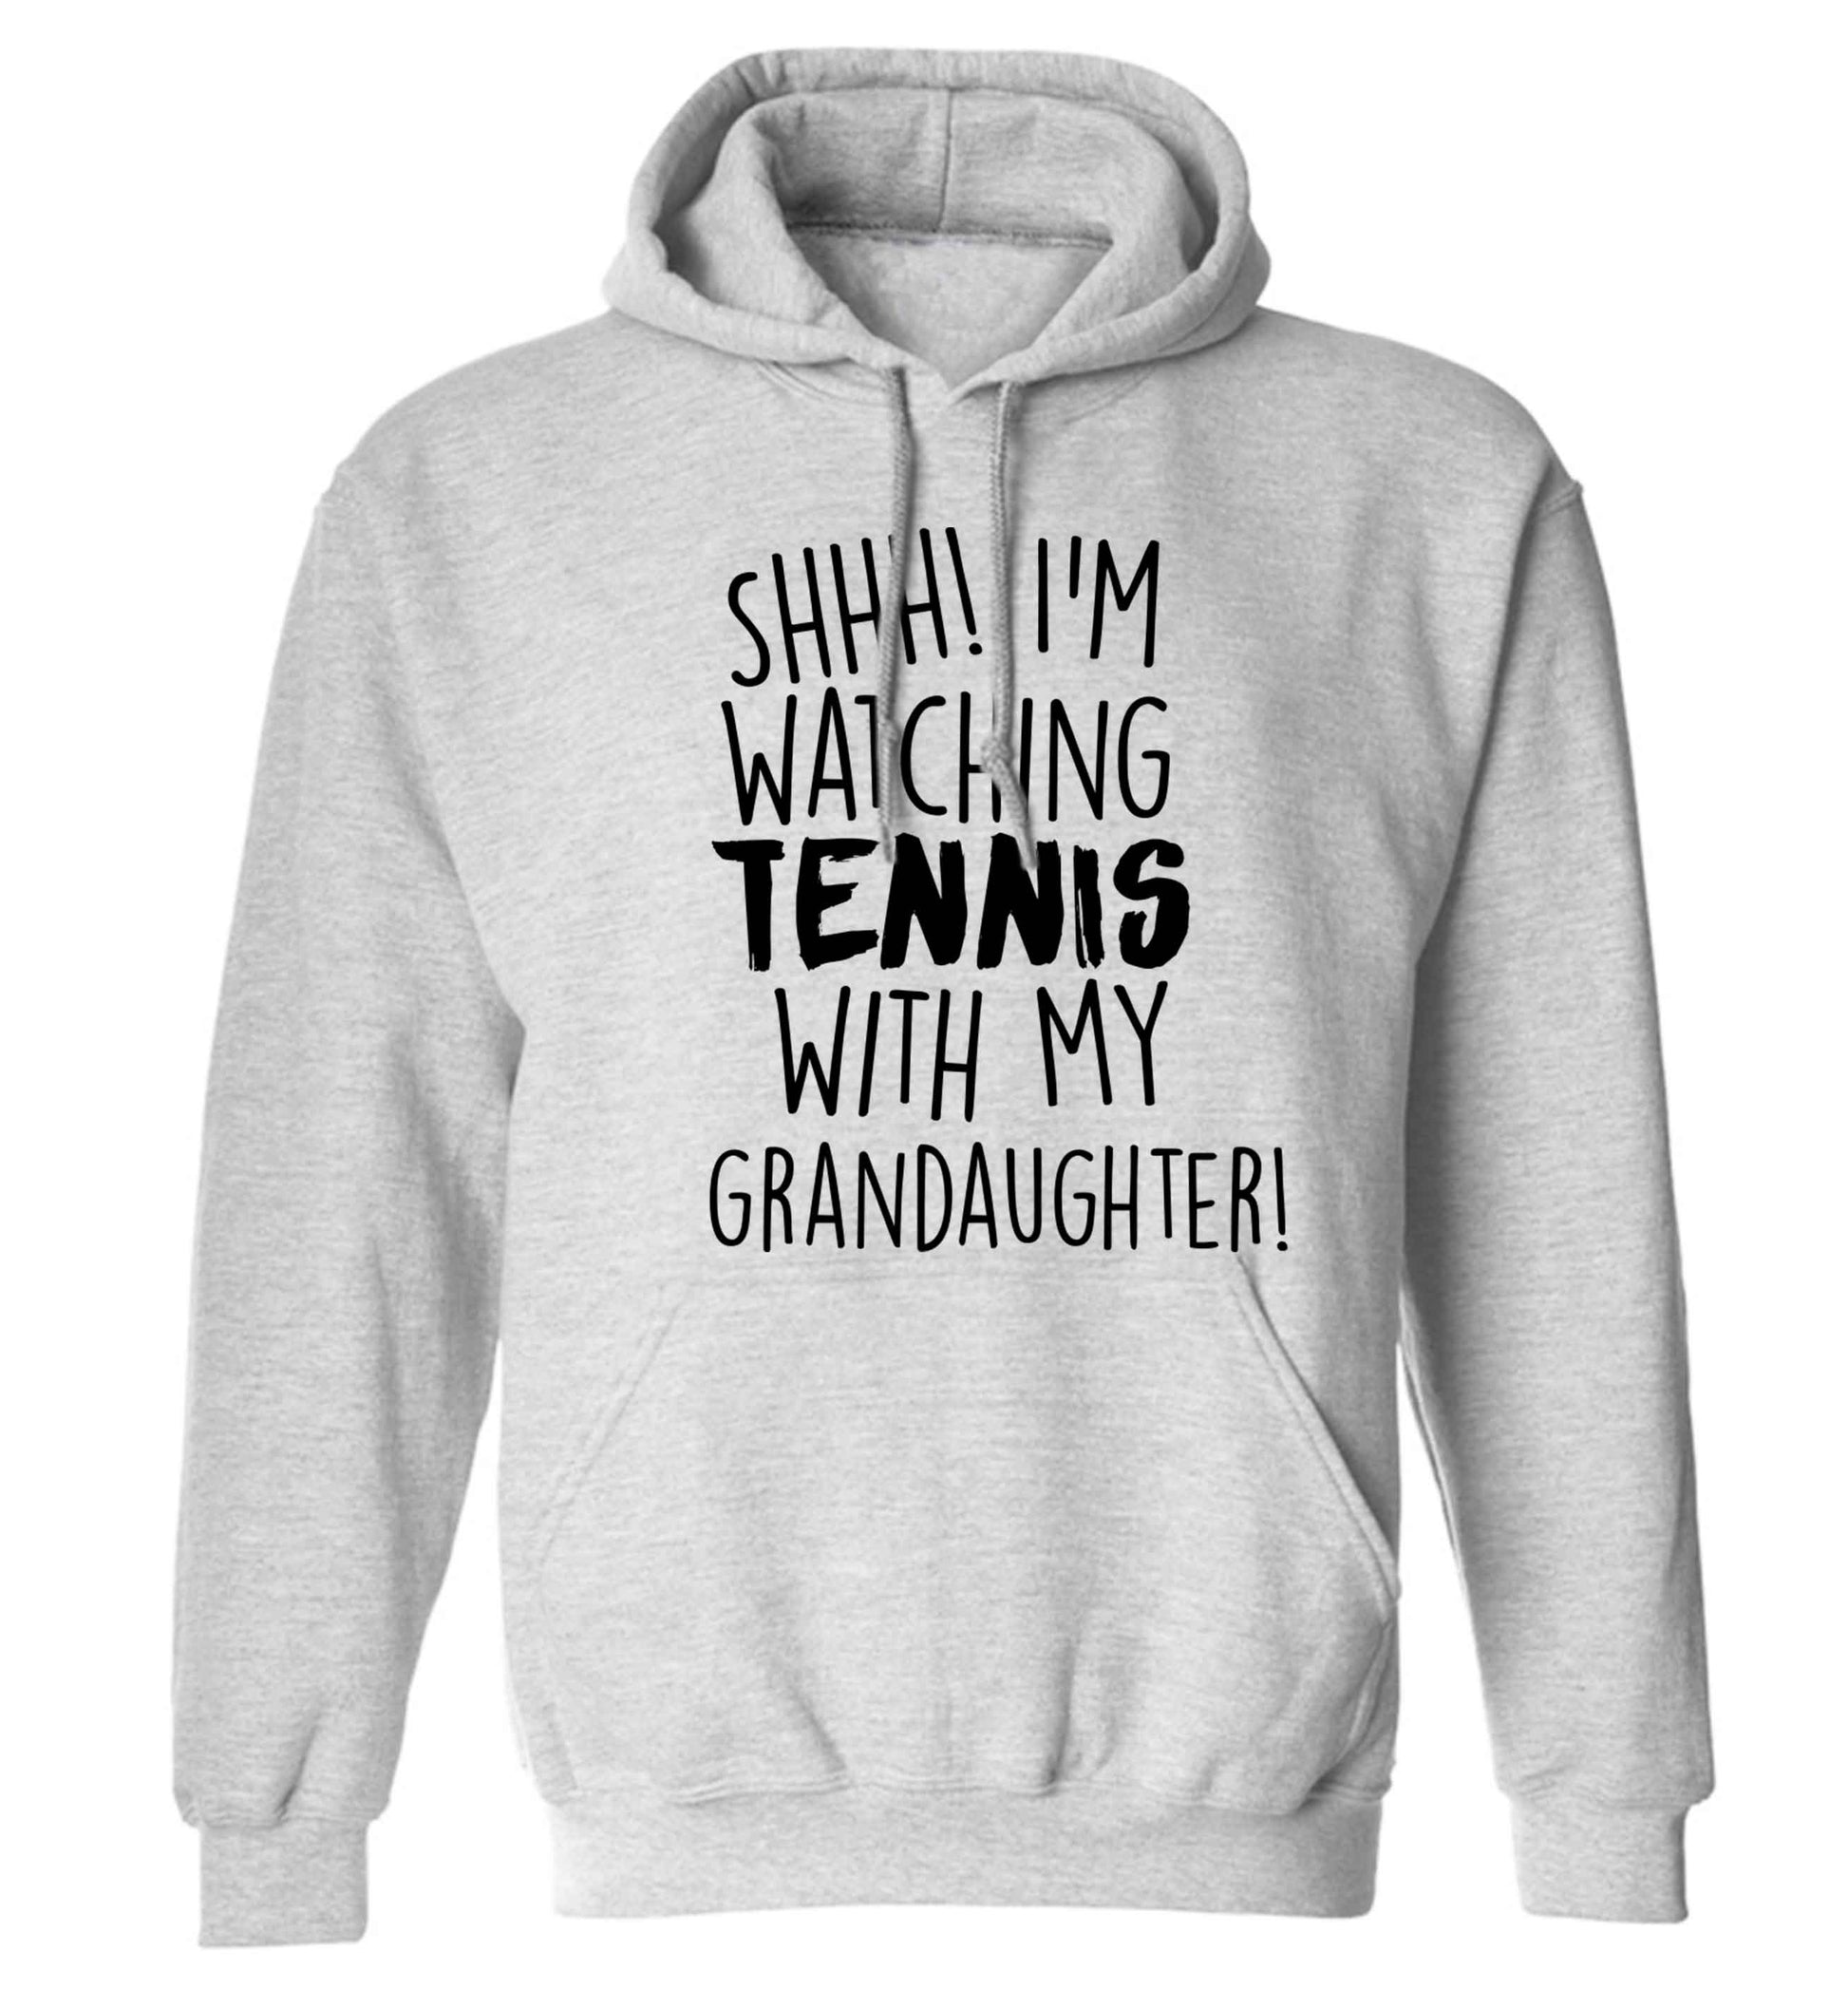 Shh! I'm watching tennis with my granddaughter! adults unisex grey hoodie 2XL